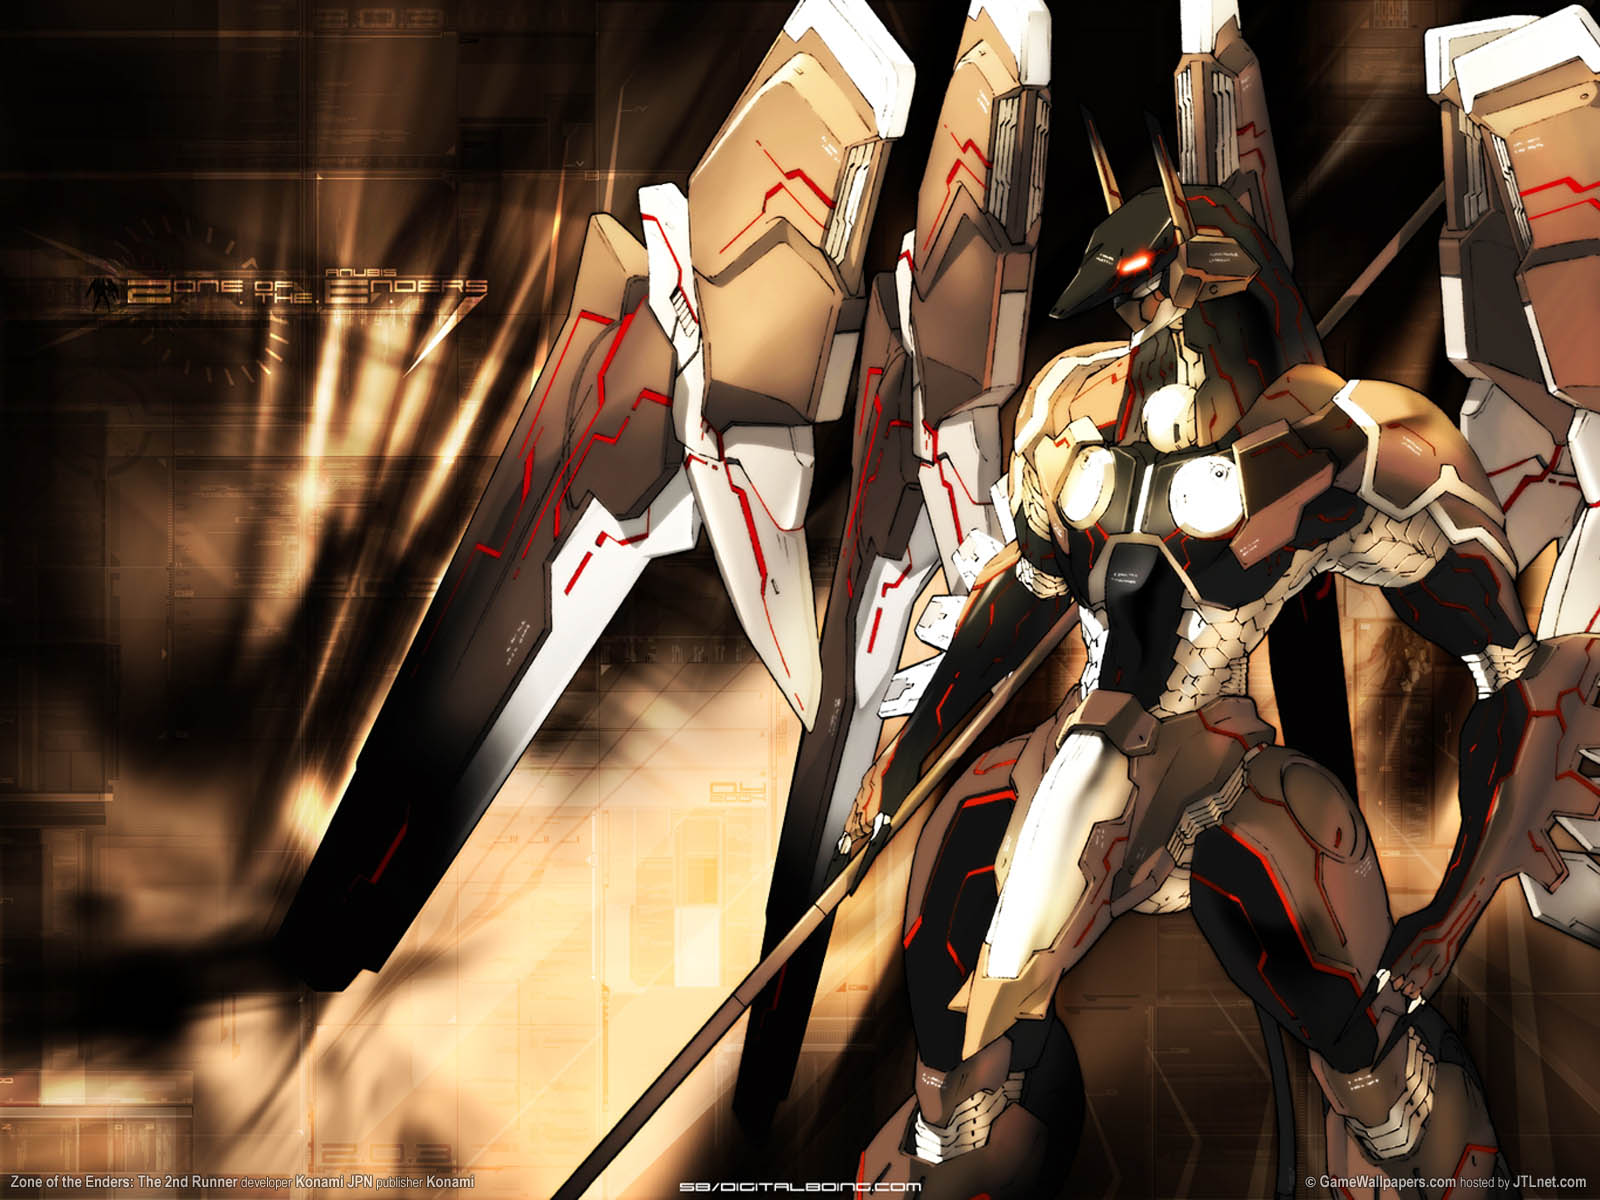 Zone of the Enders: The 2nd Runner wallpaper 04 1600x1200